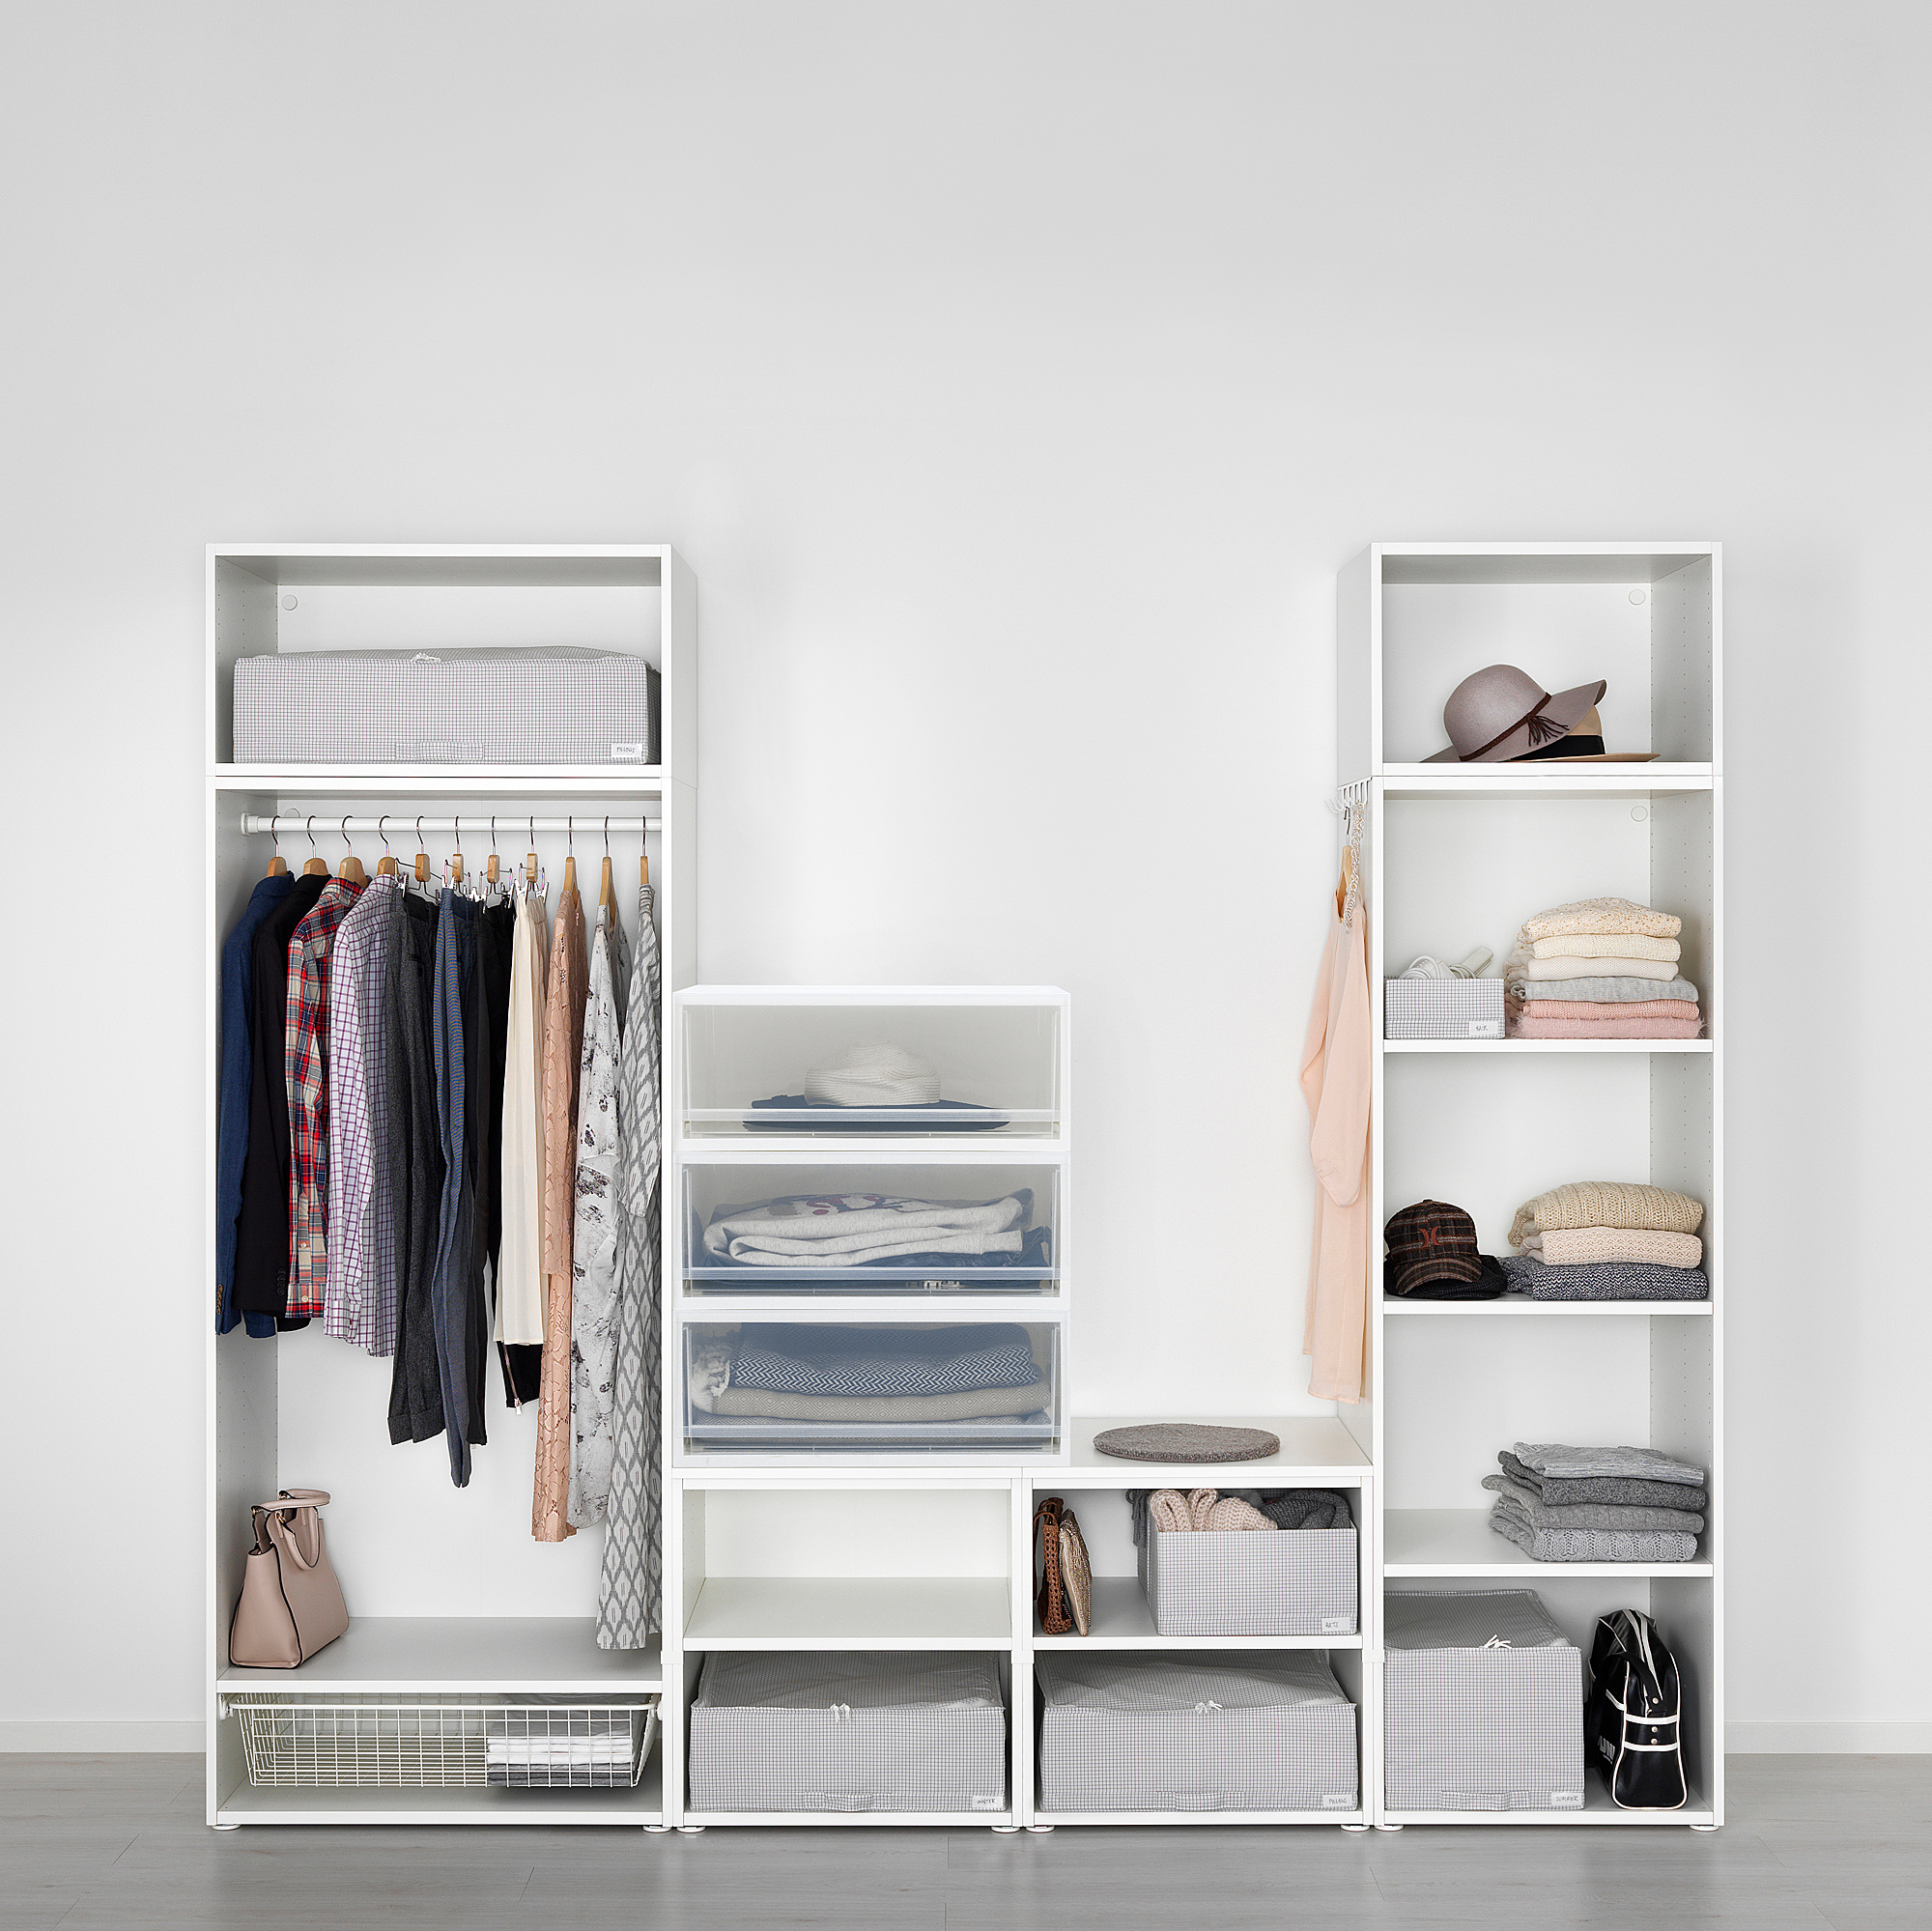 SOPPROT pull-out storage unit